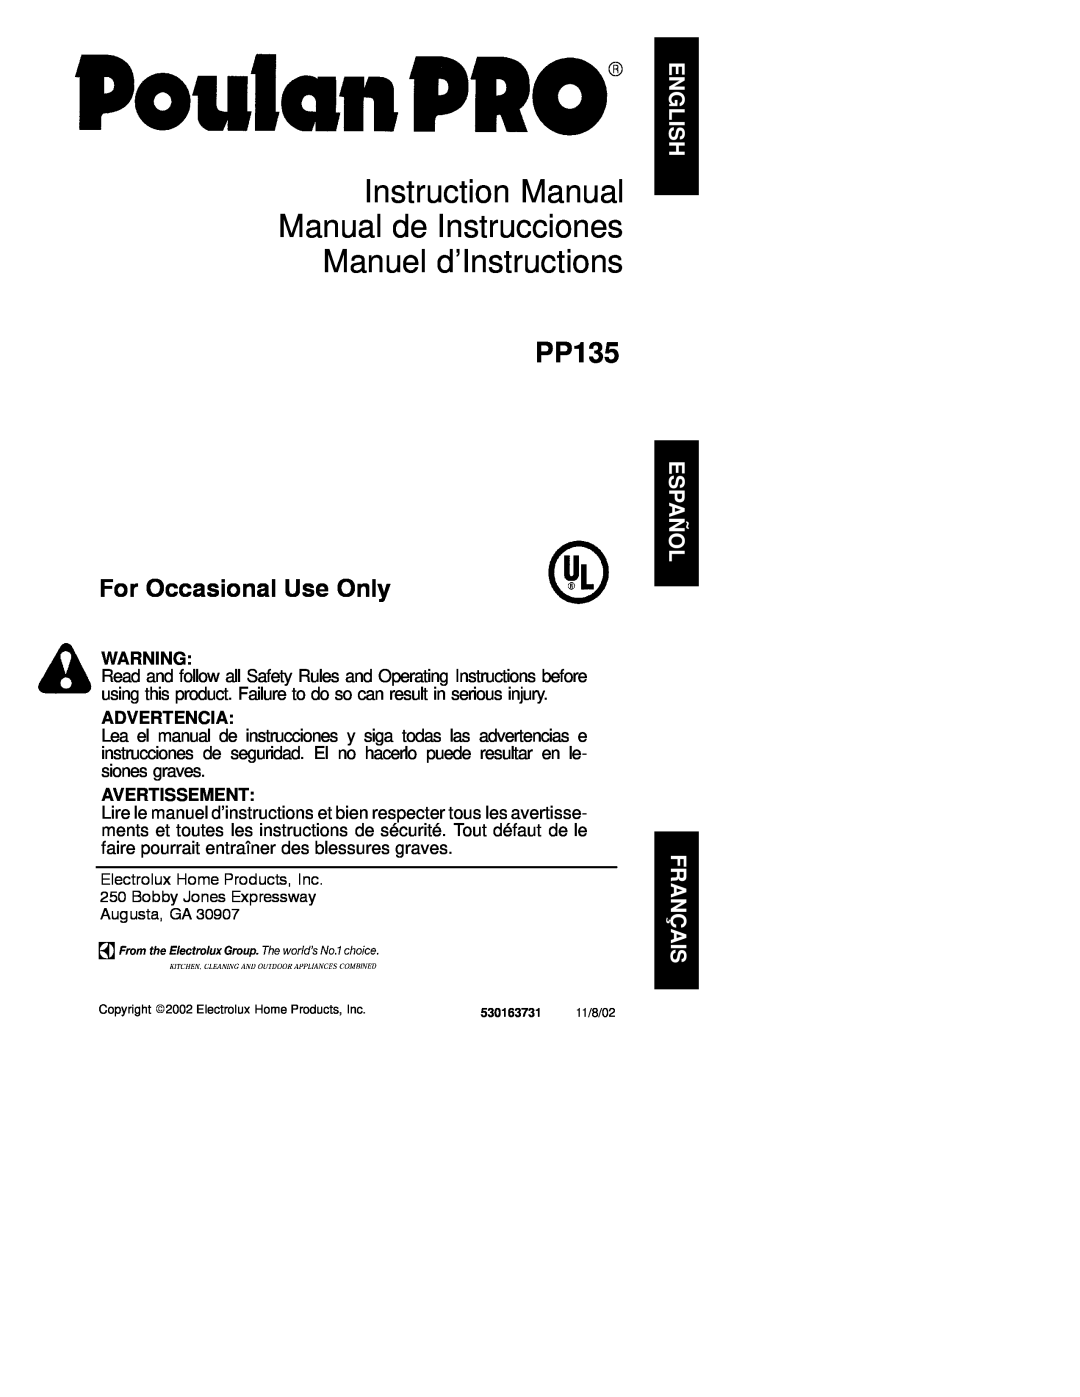 Poulan 530163731 instruction manual Advertencia, Avertissement, PP135, For Occasional Use Only 